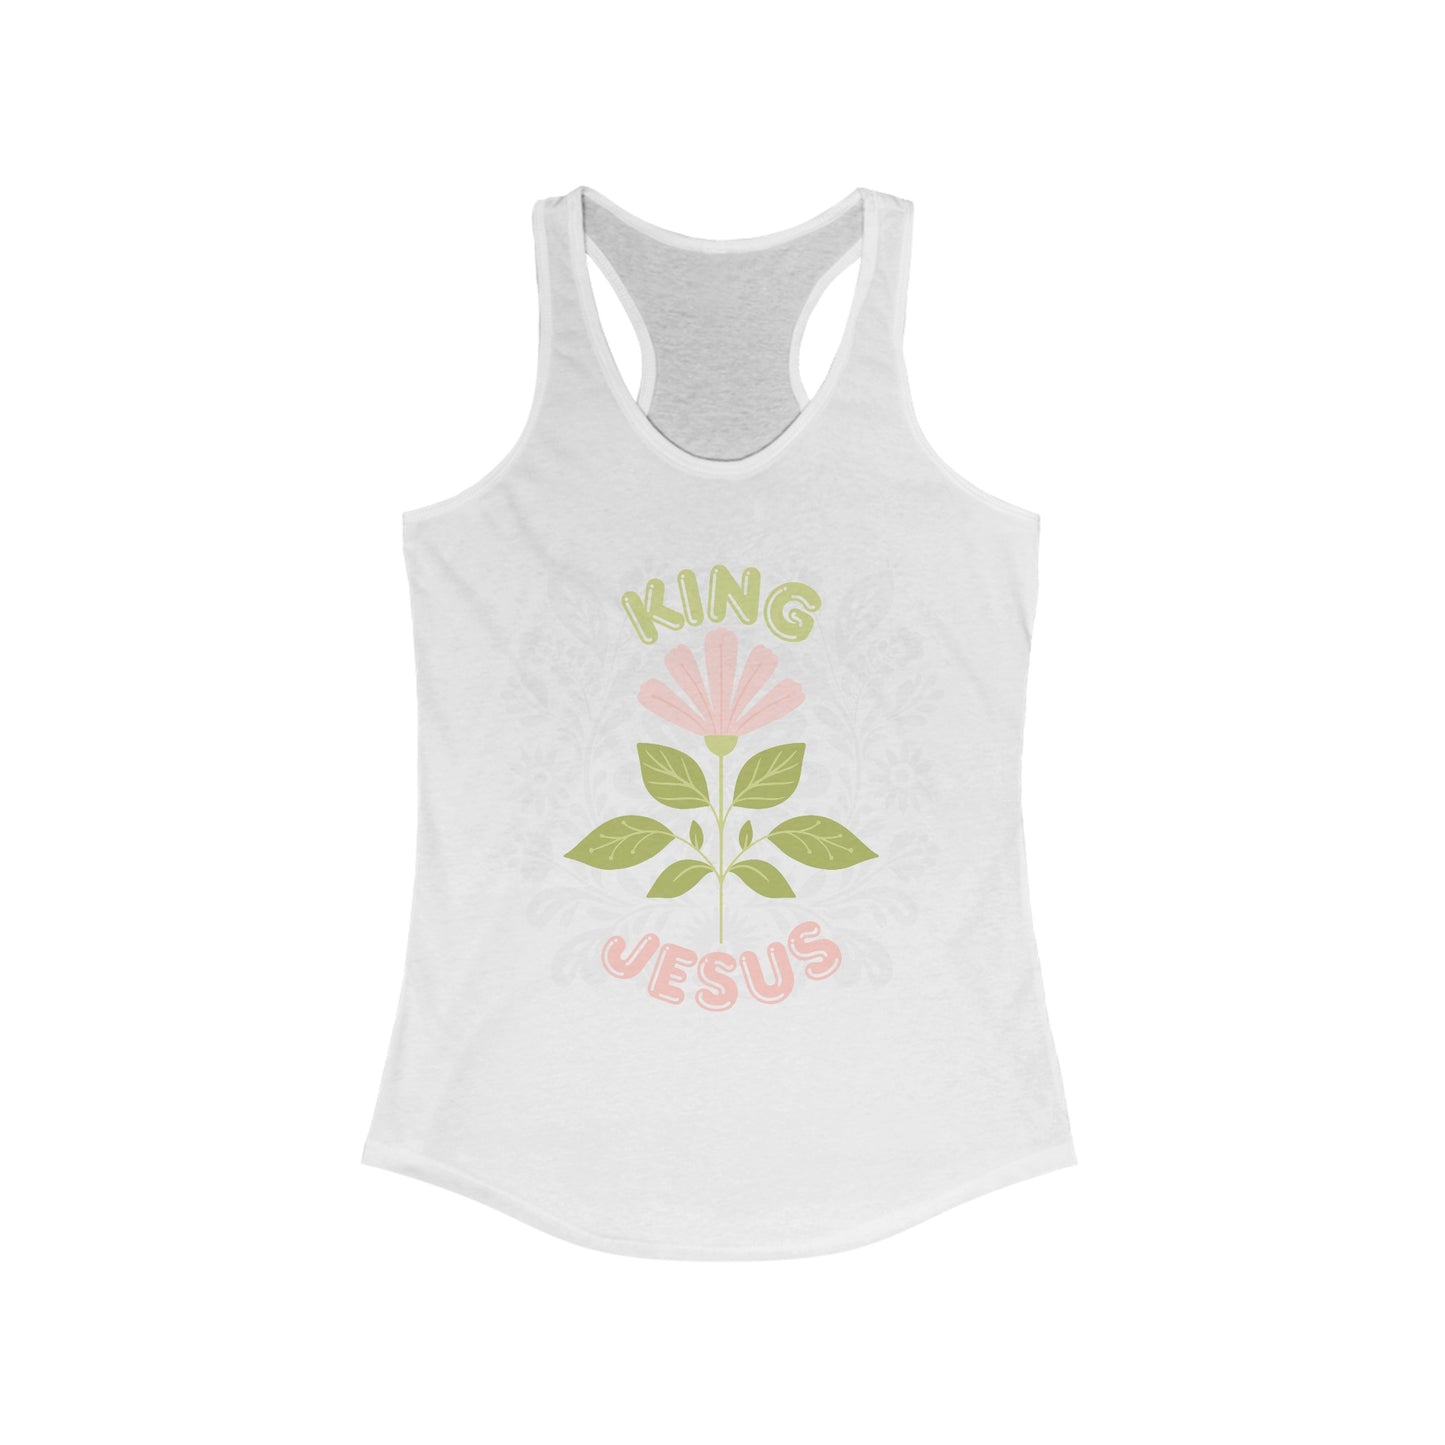 A King Jesus Flower Racerback Tank - Blessed Footprints Collection